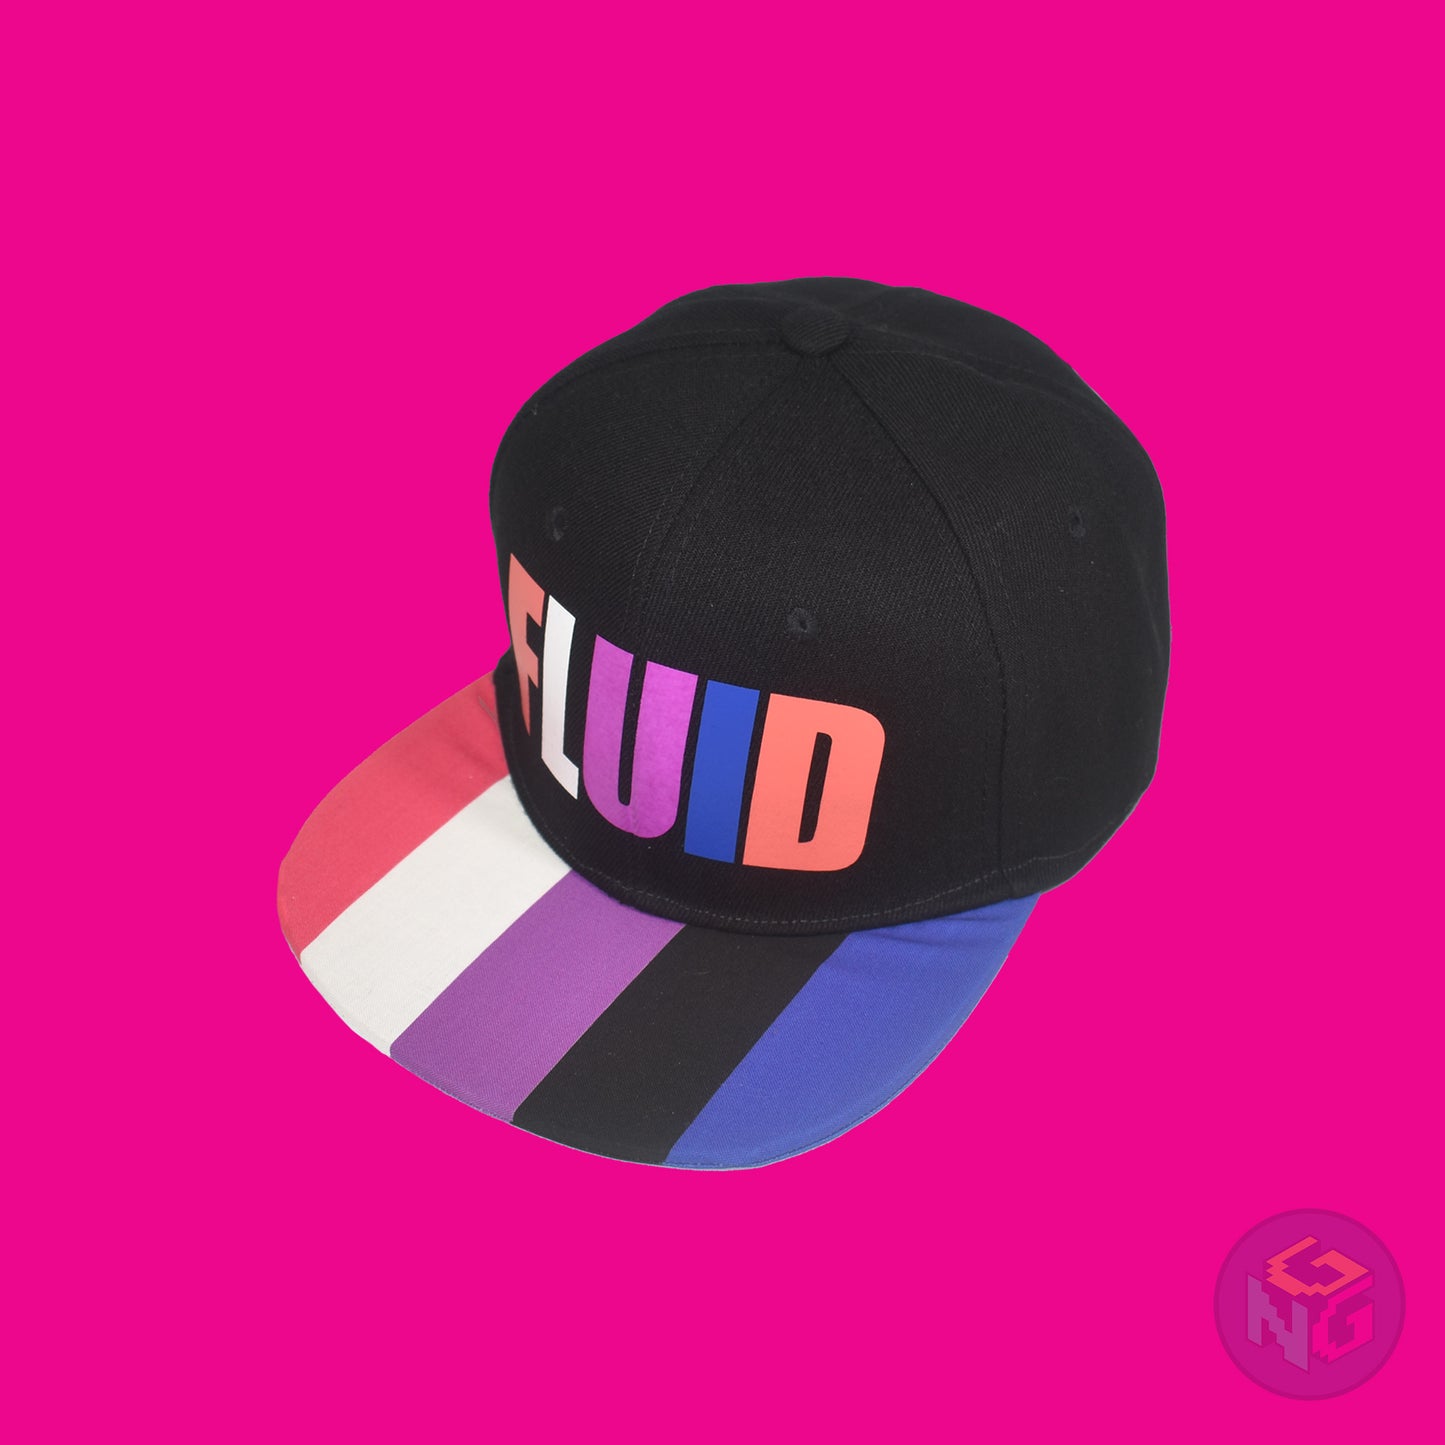 Black flat bill snapback hat. The brim has the genderfluid pride flag on both sides and the front of the hat has the word “FLUID” in peach, white, magenta, and royal blue letters. Front left view